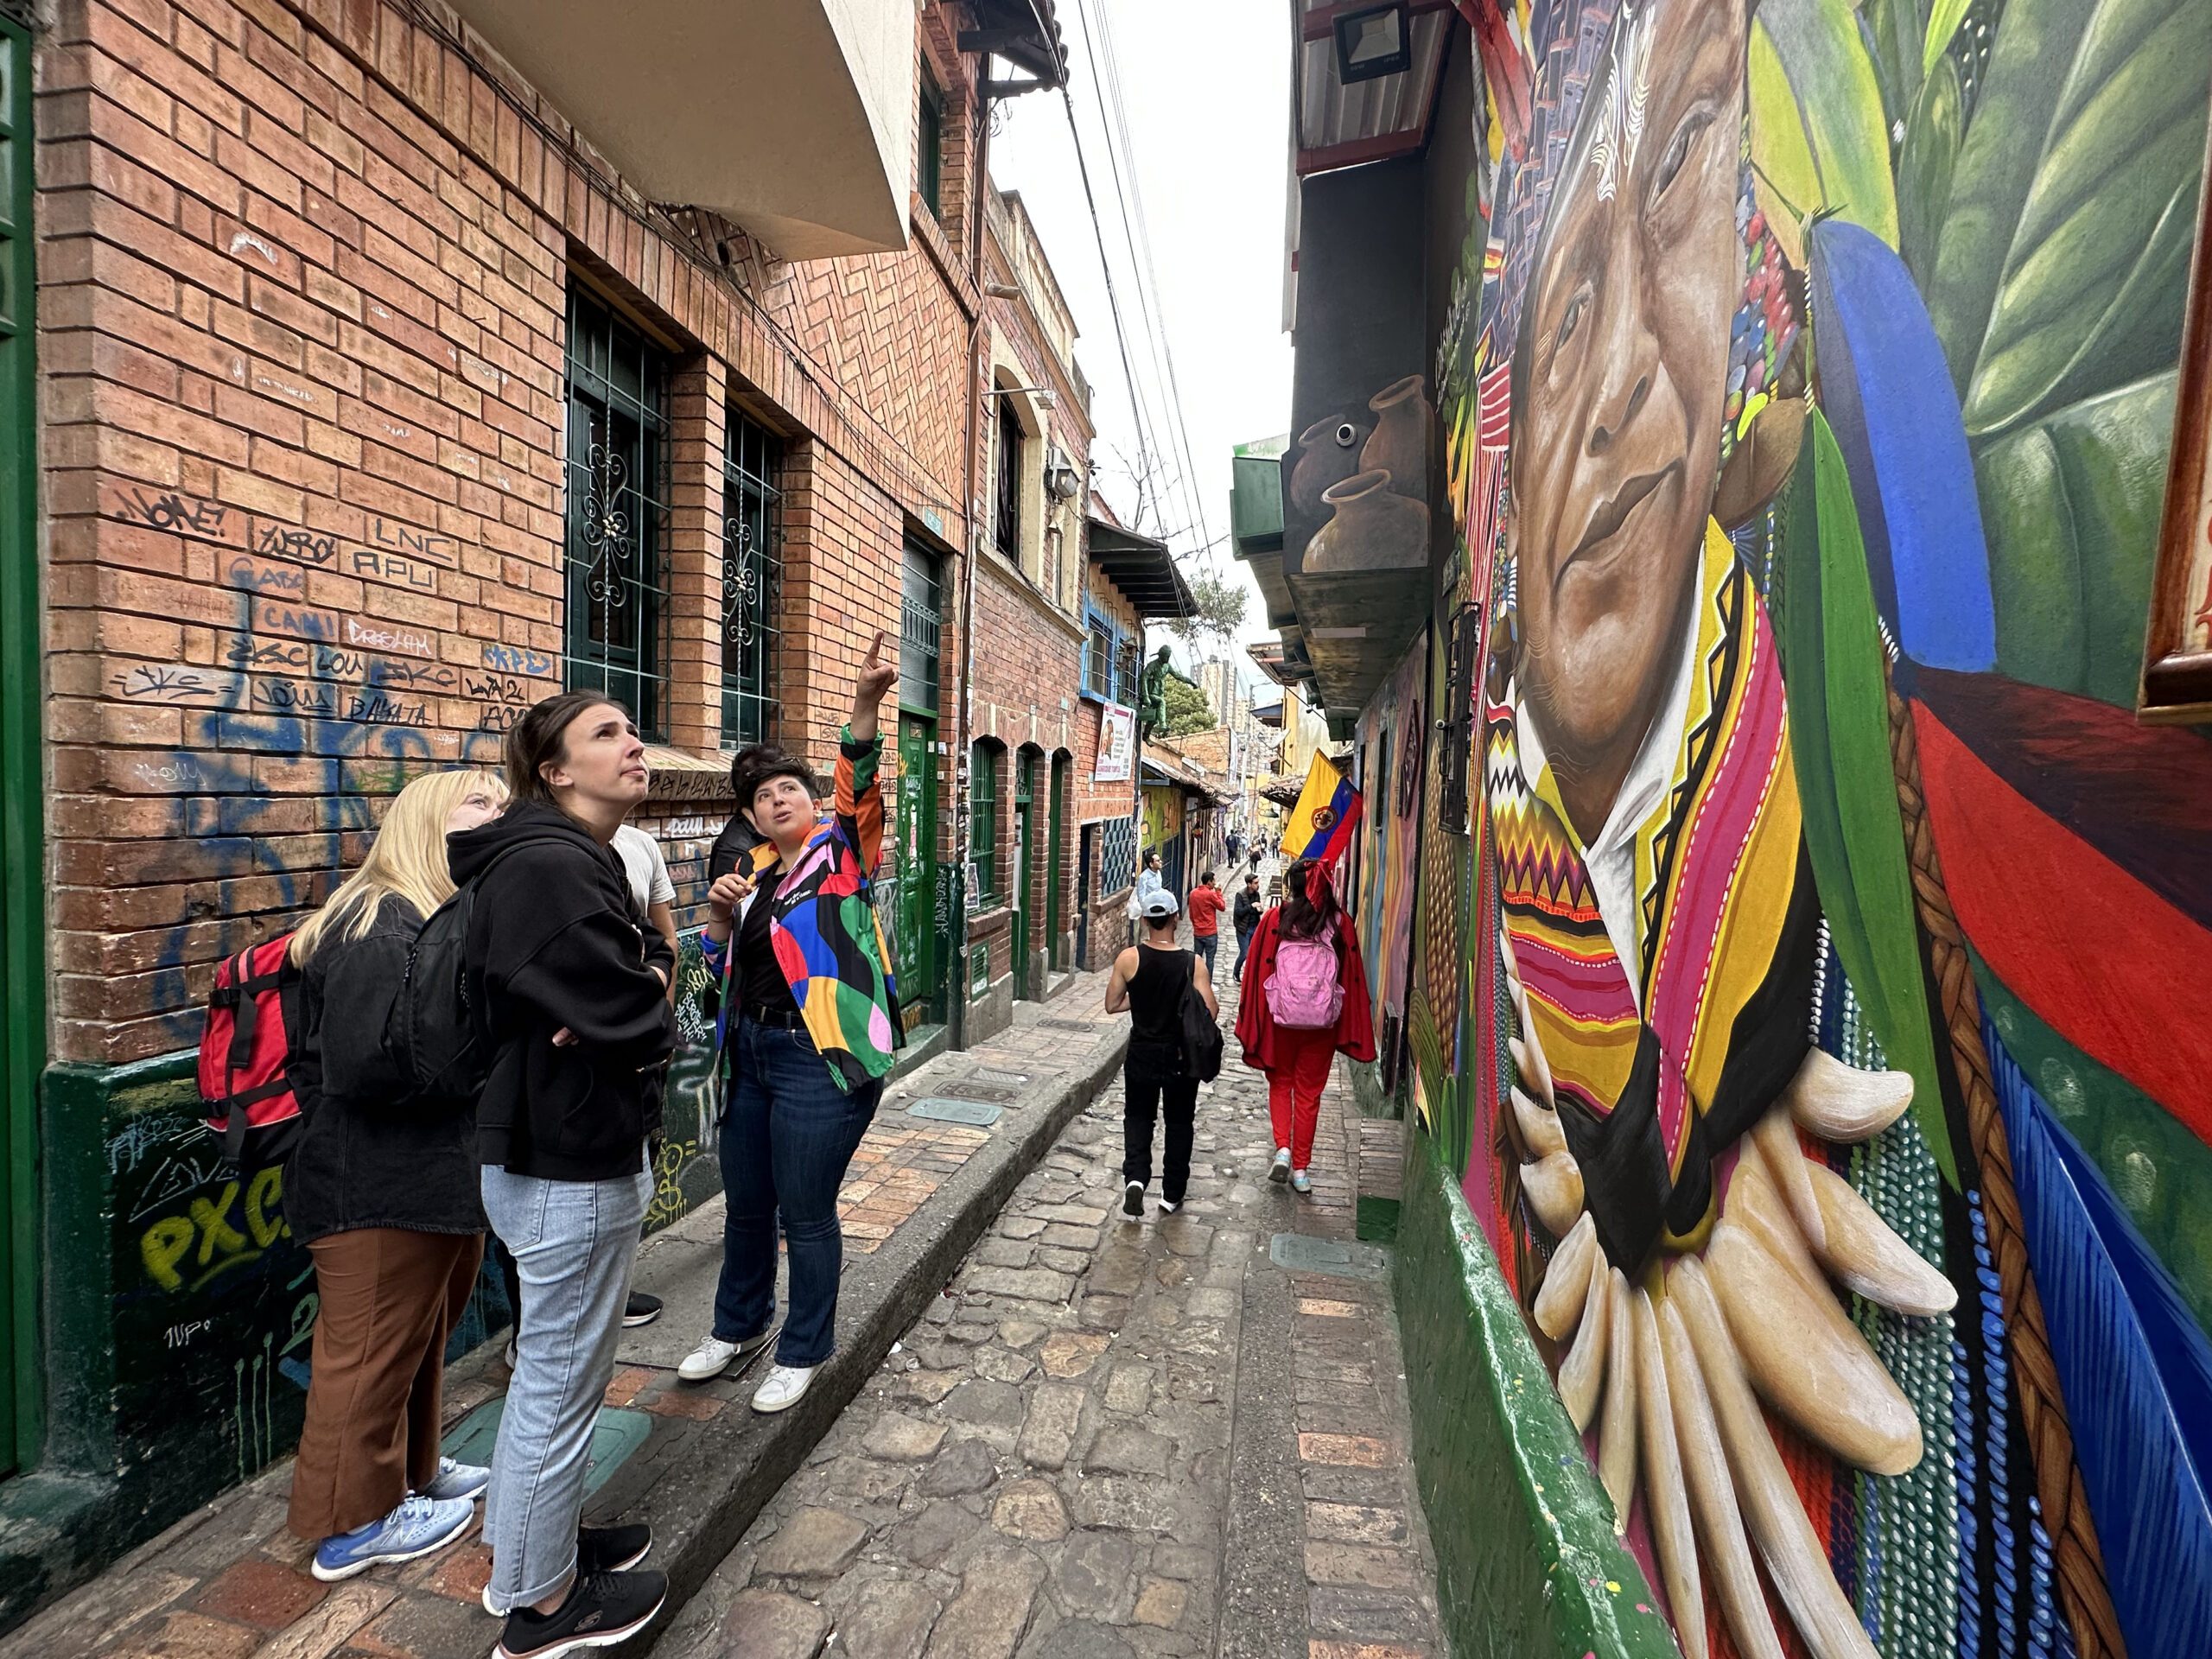 Tourists stand on a narrow cobblestone street, admiring a large, colorful mural on a brick wall. One person points out details of the mural while others observe. The street has graffiti and buildings—one of many captivating sights on Bogotá city tours.